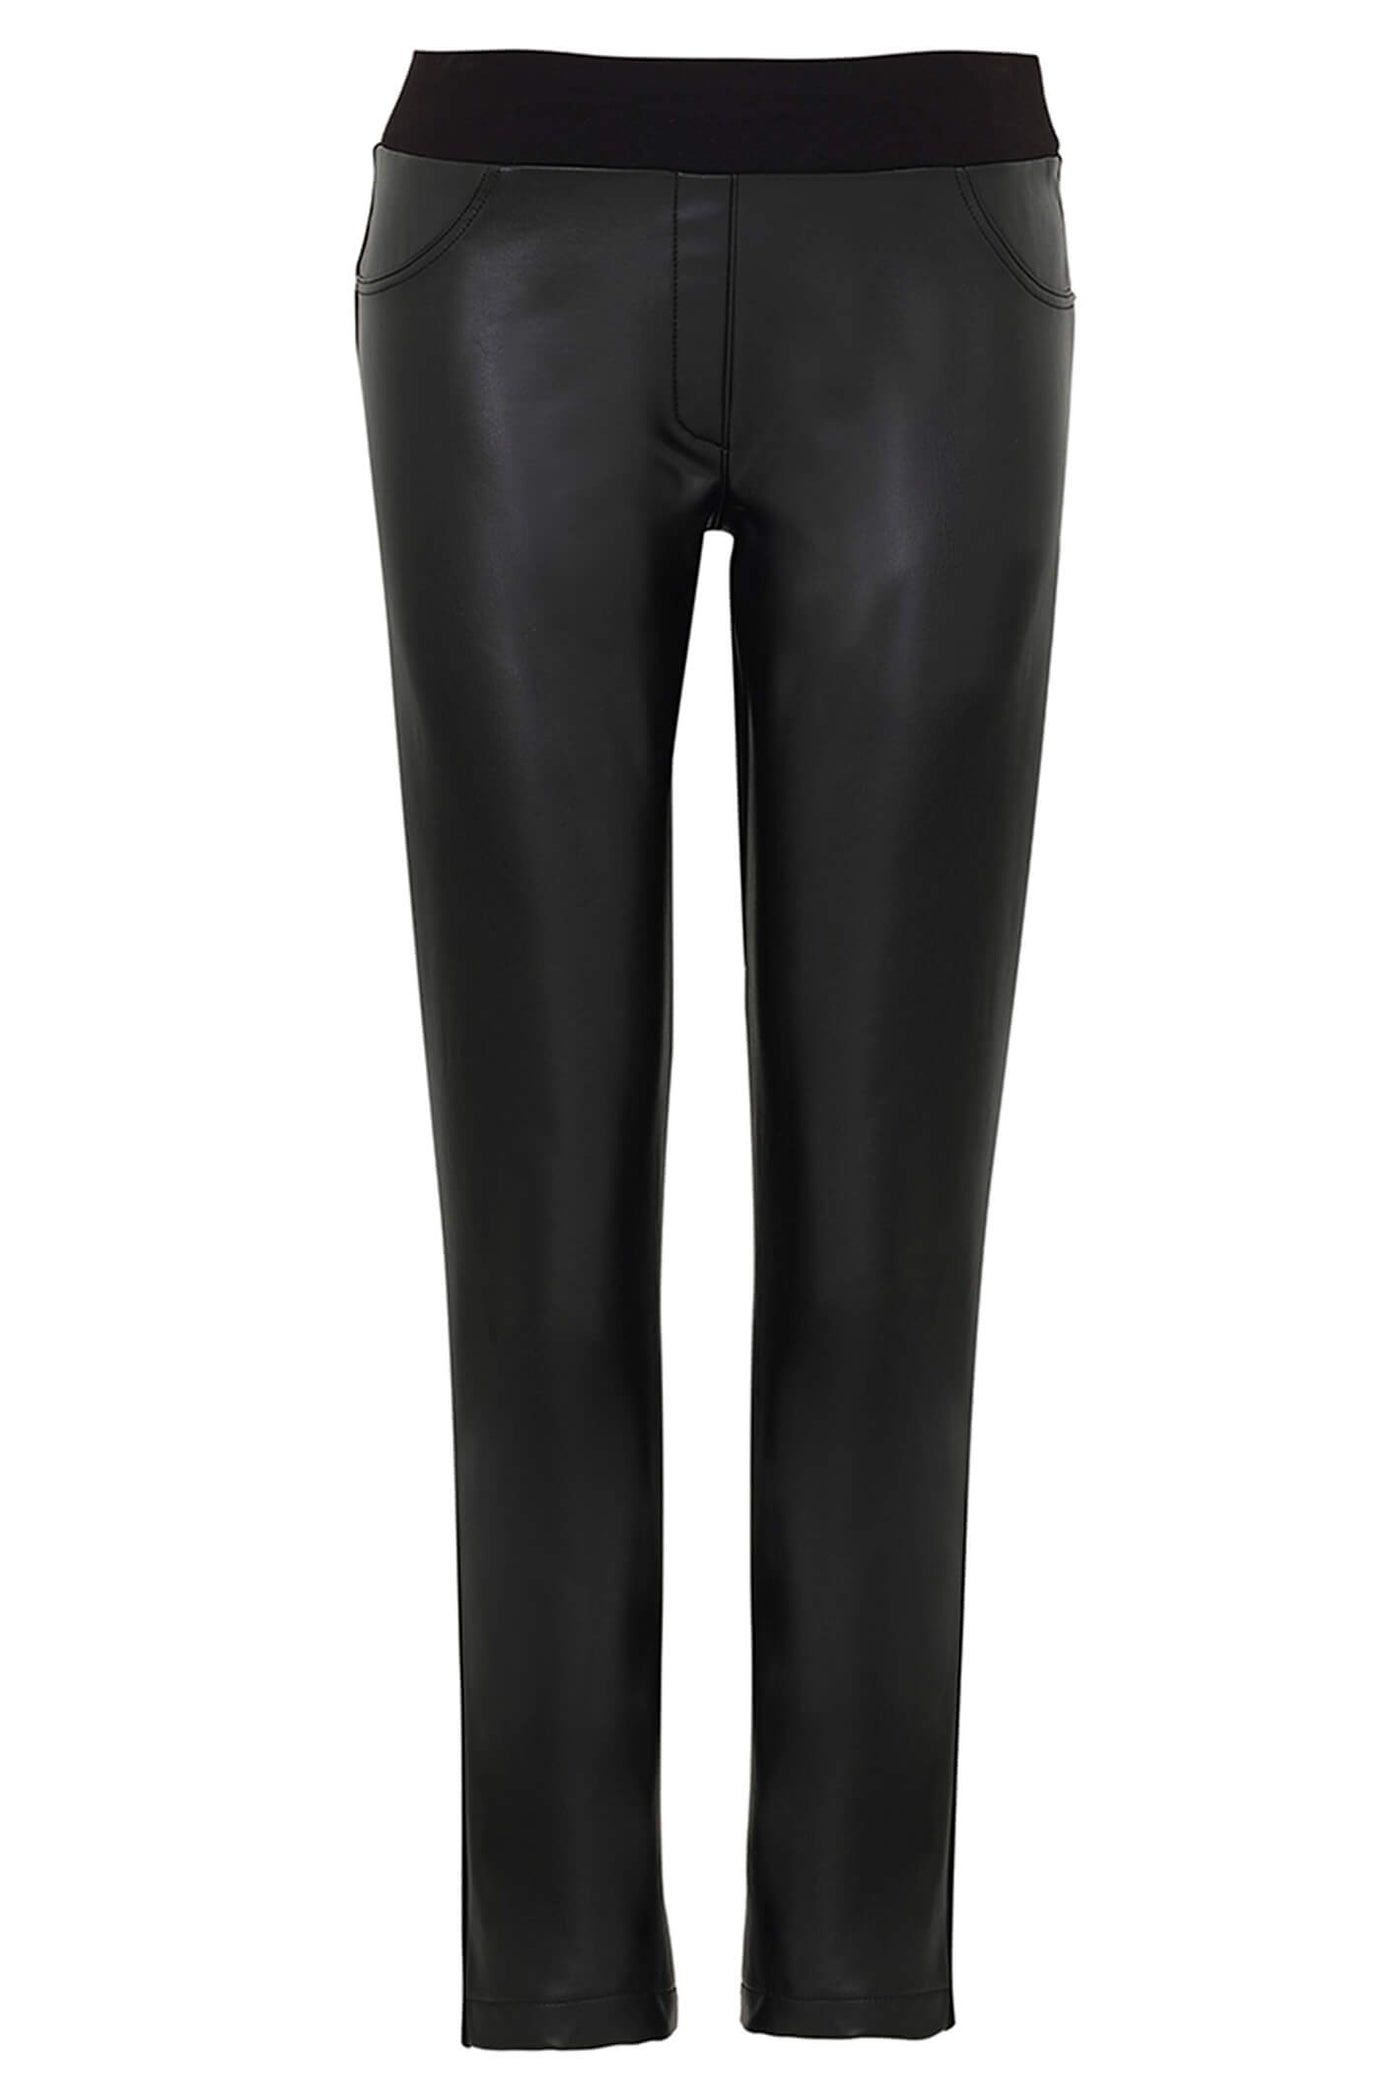 Dolcezza 73115 Black Pleather Front Pull On Trousers - Rouge Boutique